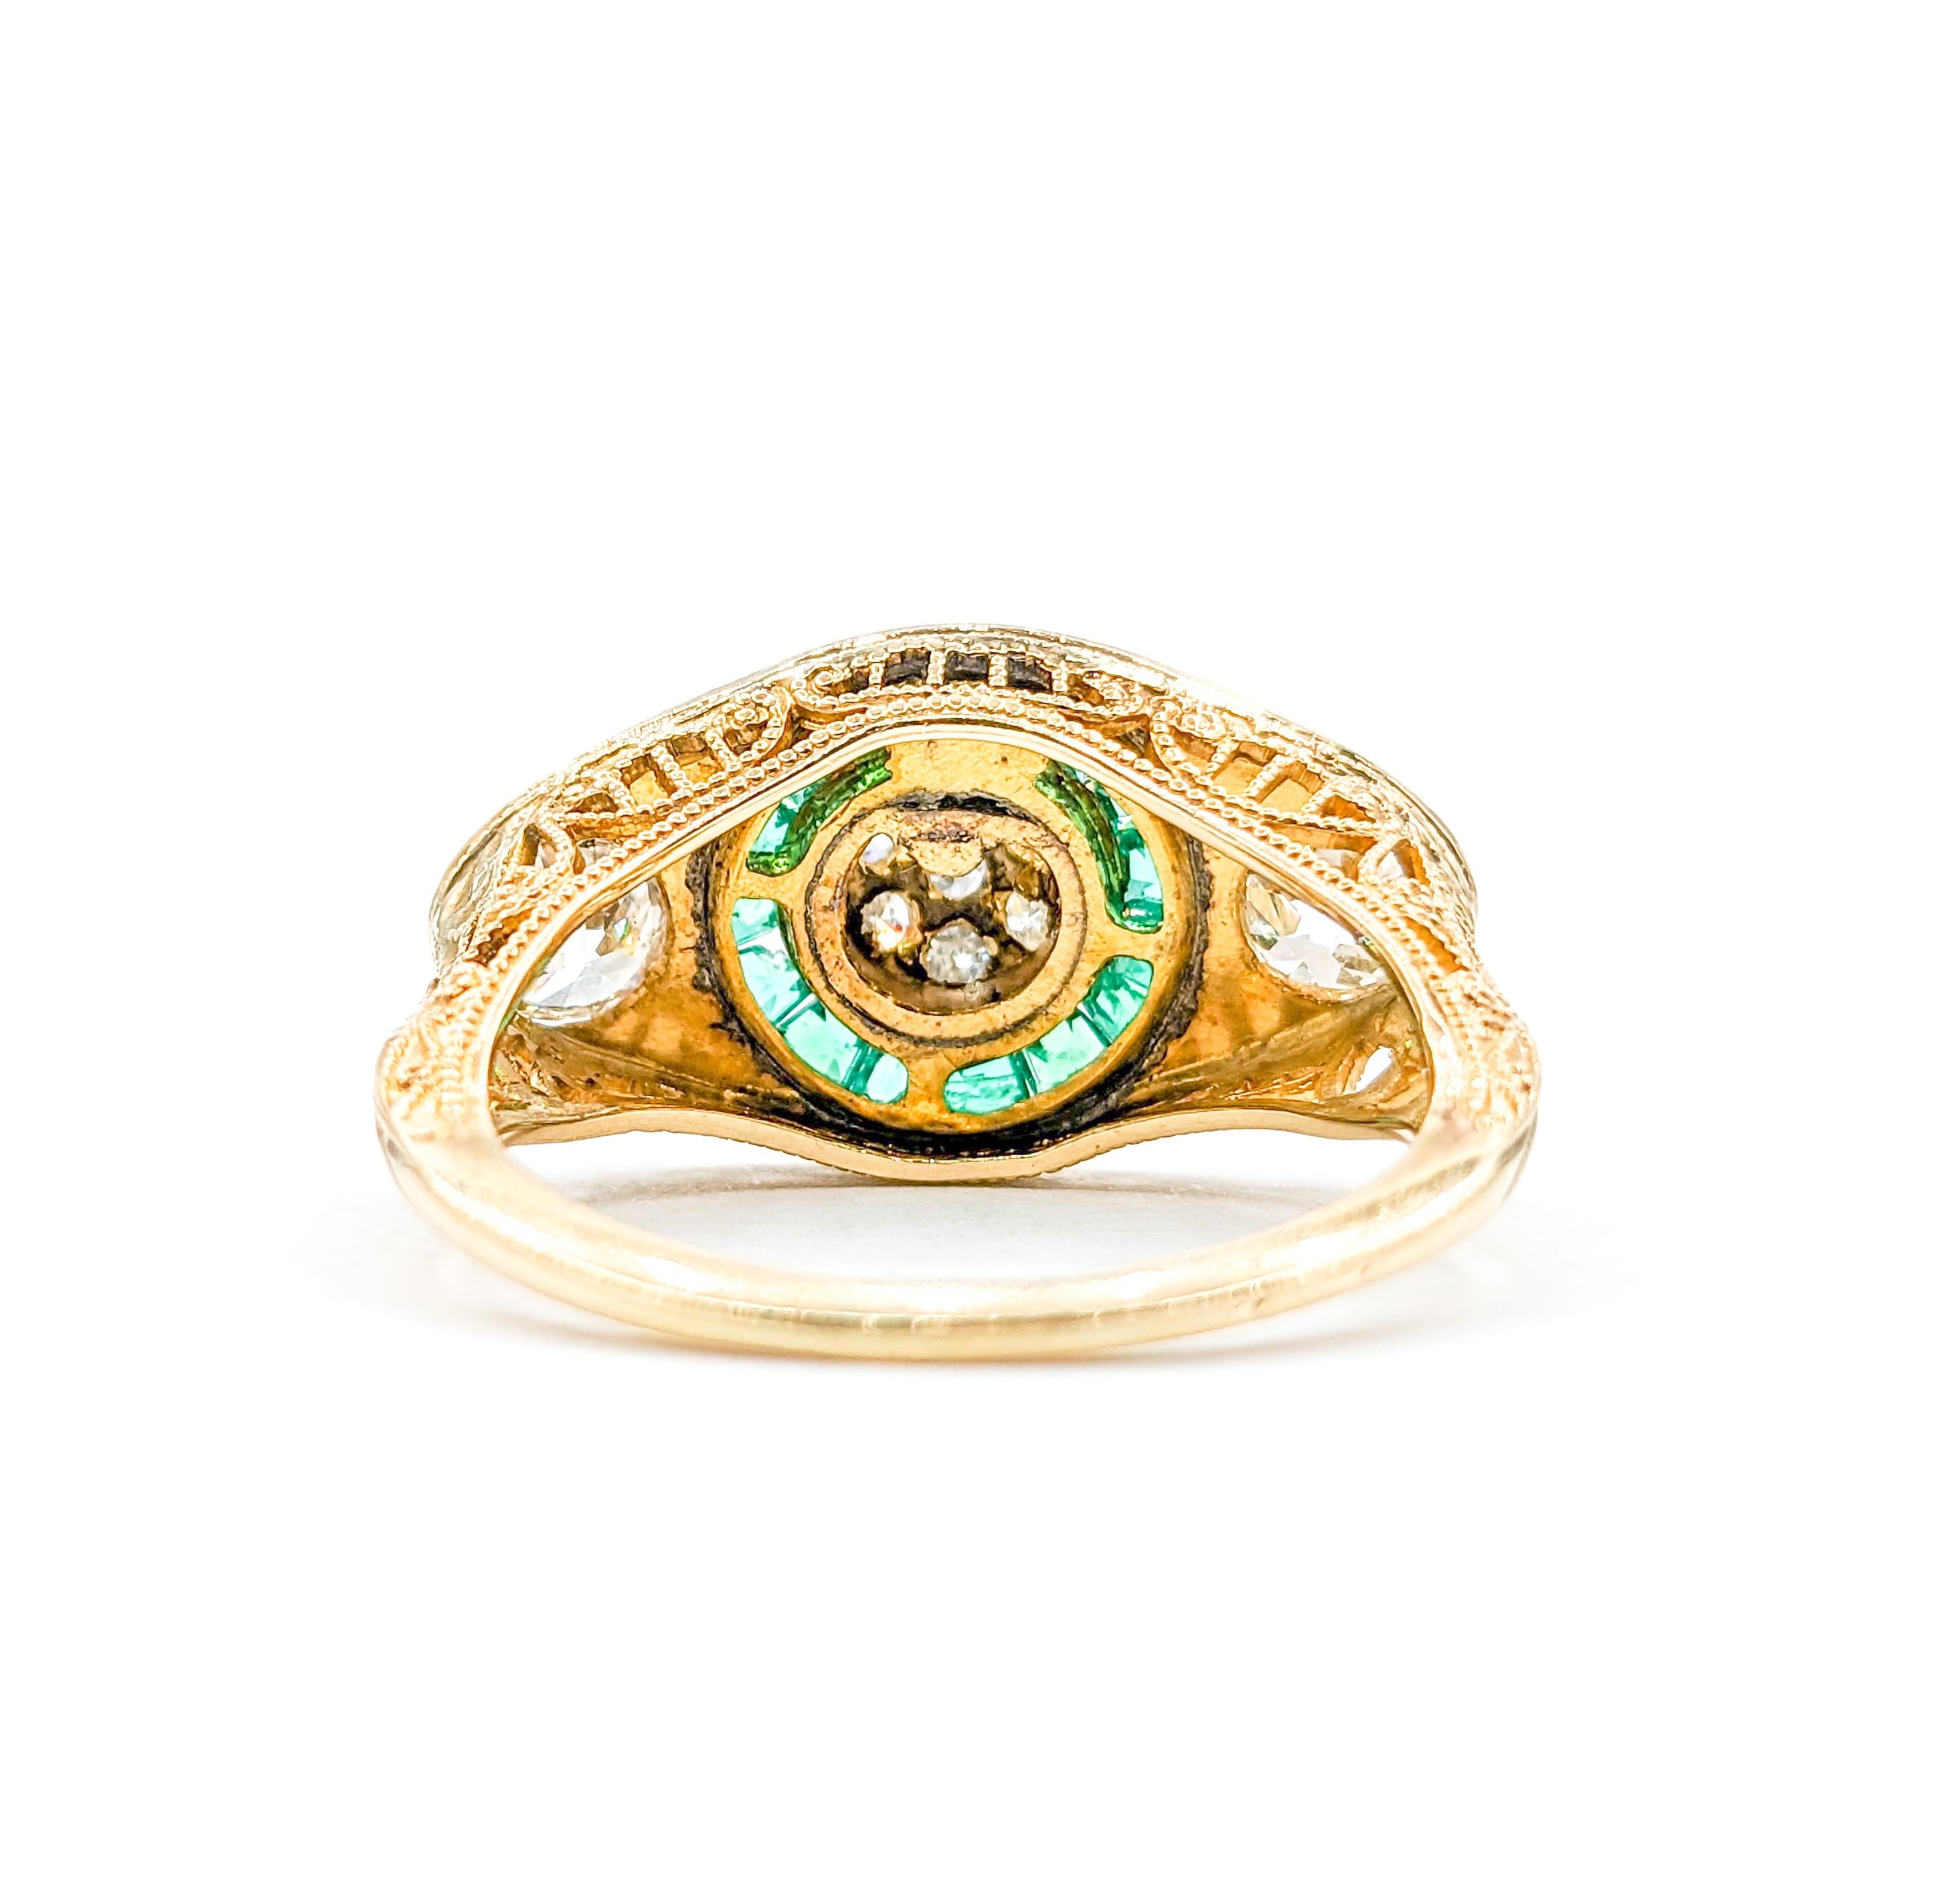 Antique Old European Diamond & Emeralds Target Ring in 14K Gold For Sale 3